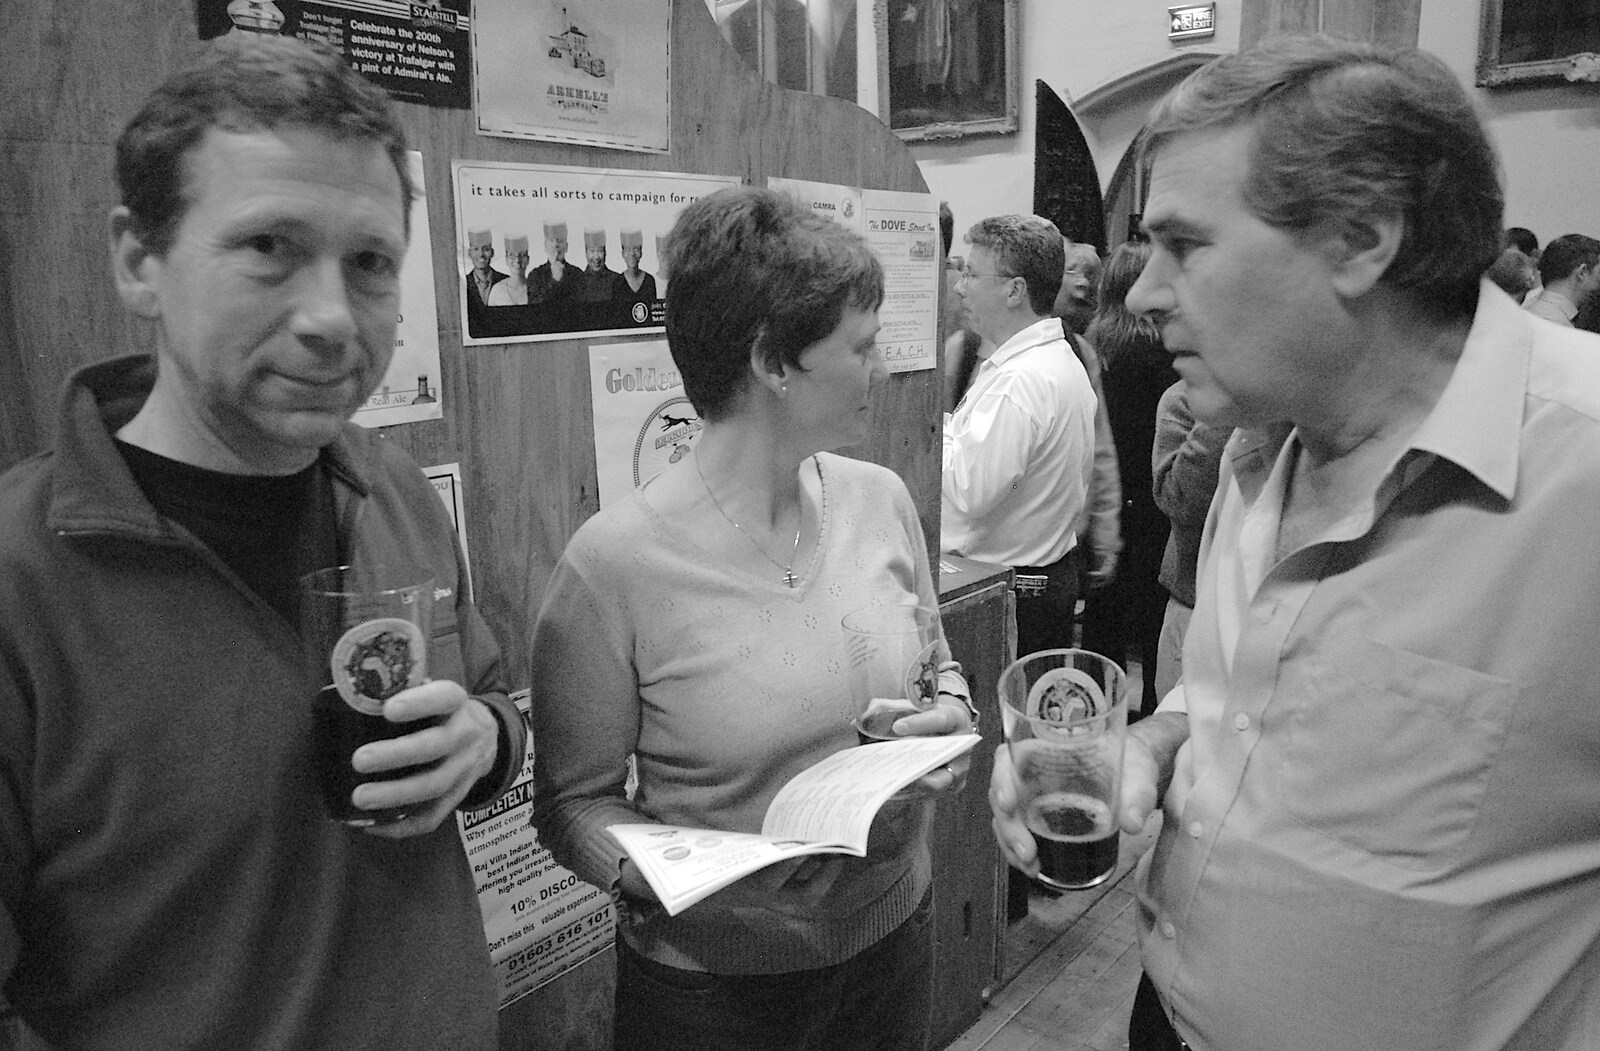 Apple, Pip and Alan by the bar from The 28th Norwich Beer Festival, St. Andrew's Hall, Norwich - 26th October 2005